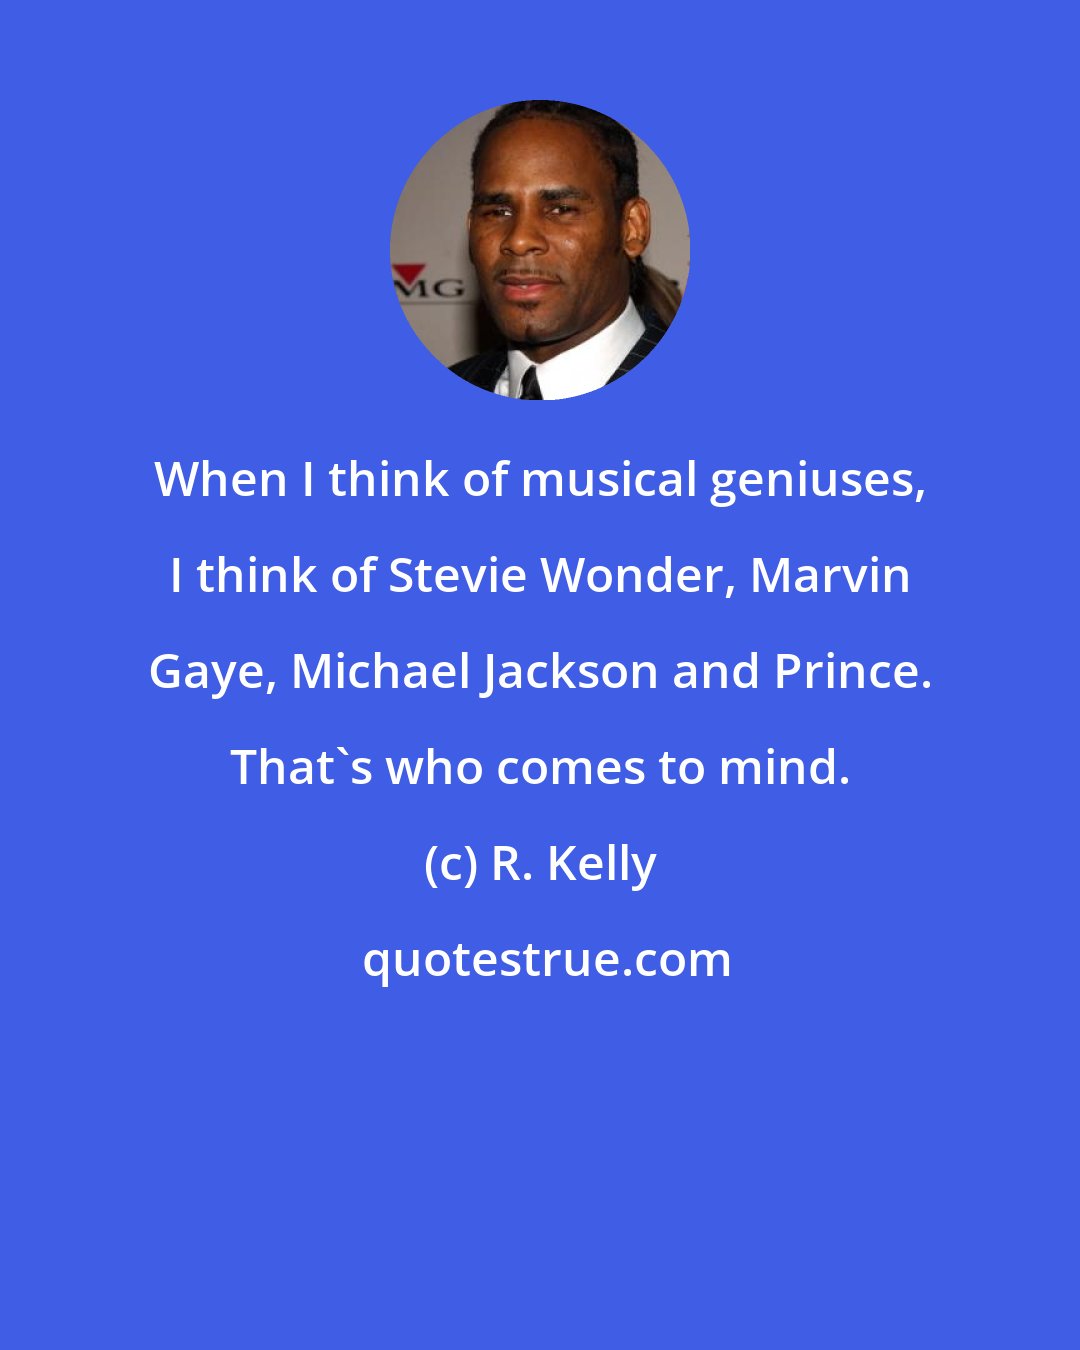 R. Kelly: When I think of musical geniuses, I think of Stevie Wonder, Marvin Gaye, Michael Jackson and Prince. That's who comes to mind.